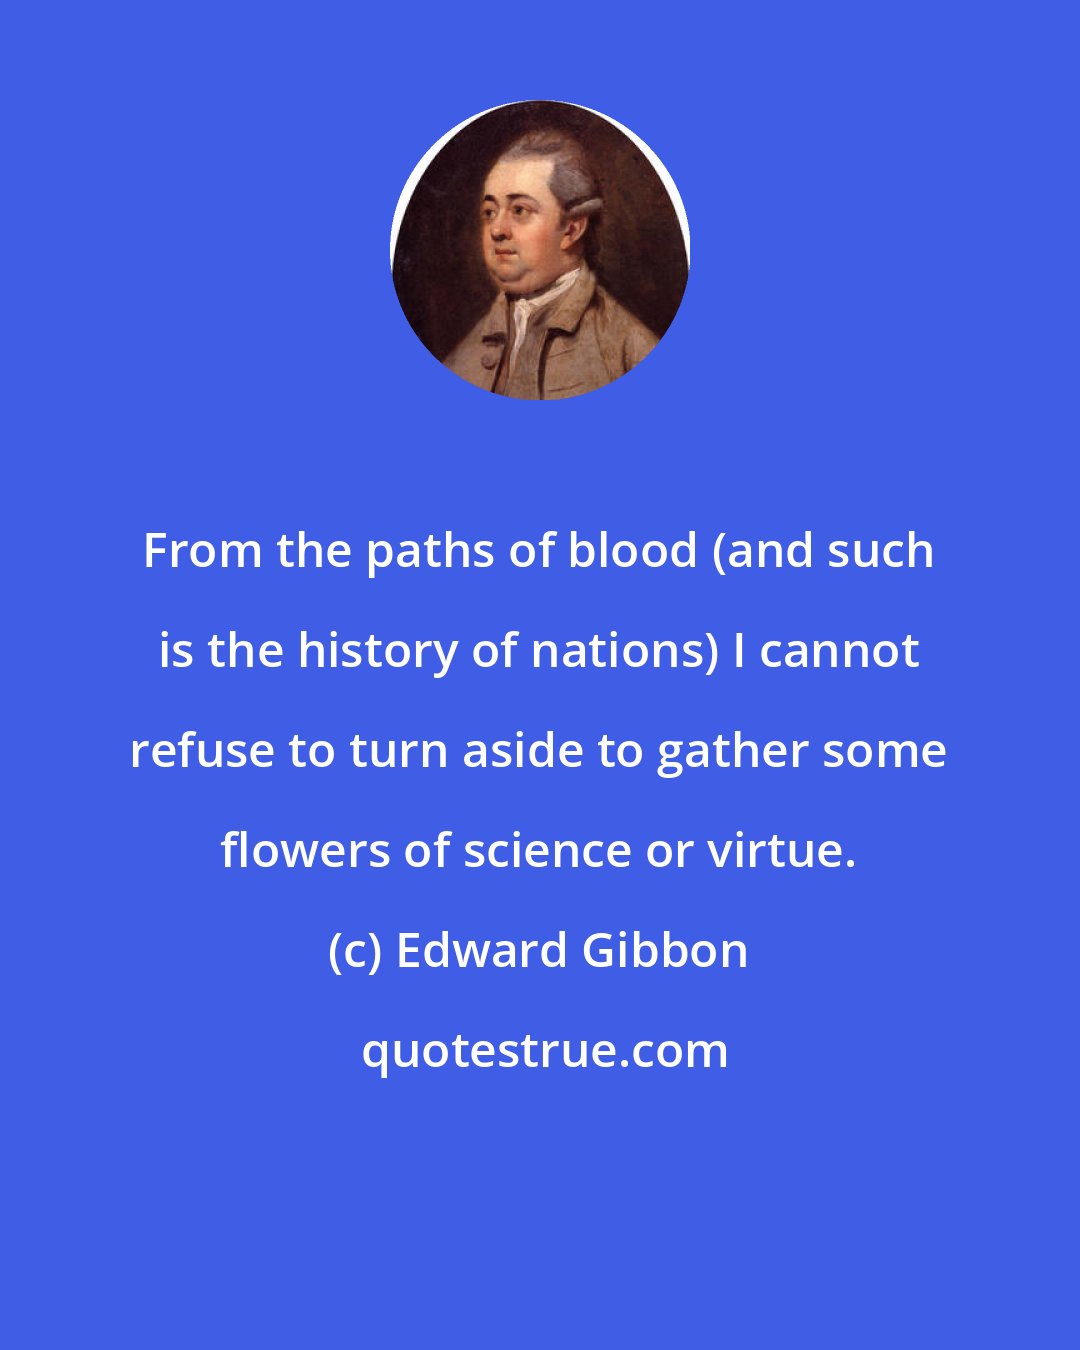 Edward Gibbon: From the paths of blood (and such is the history of nations) I cannot refuse to turn aside to gather some flowers of science or virtue.